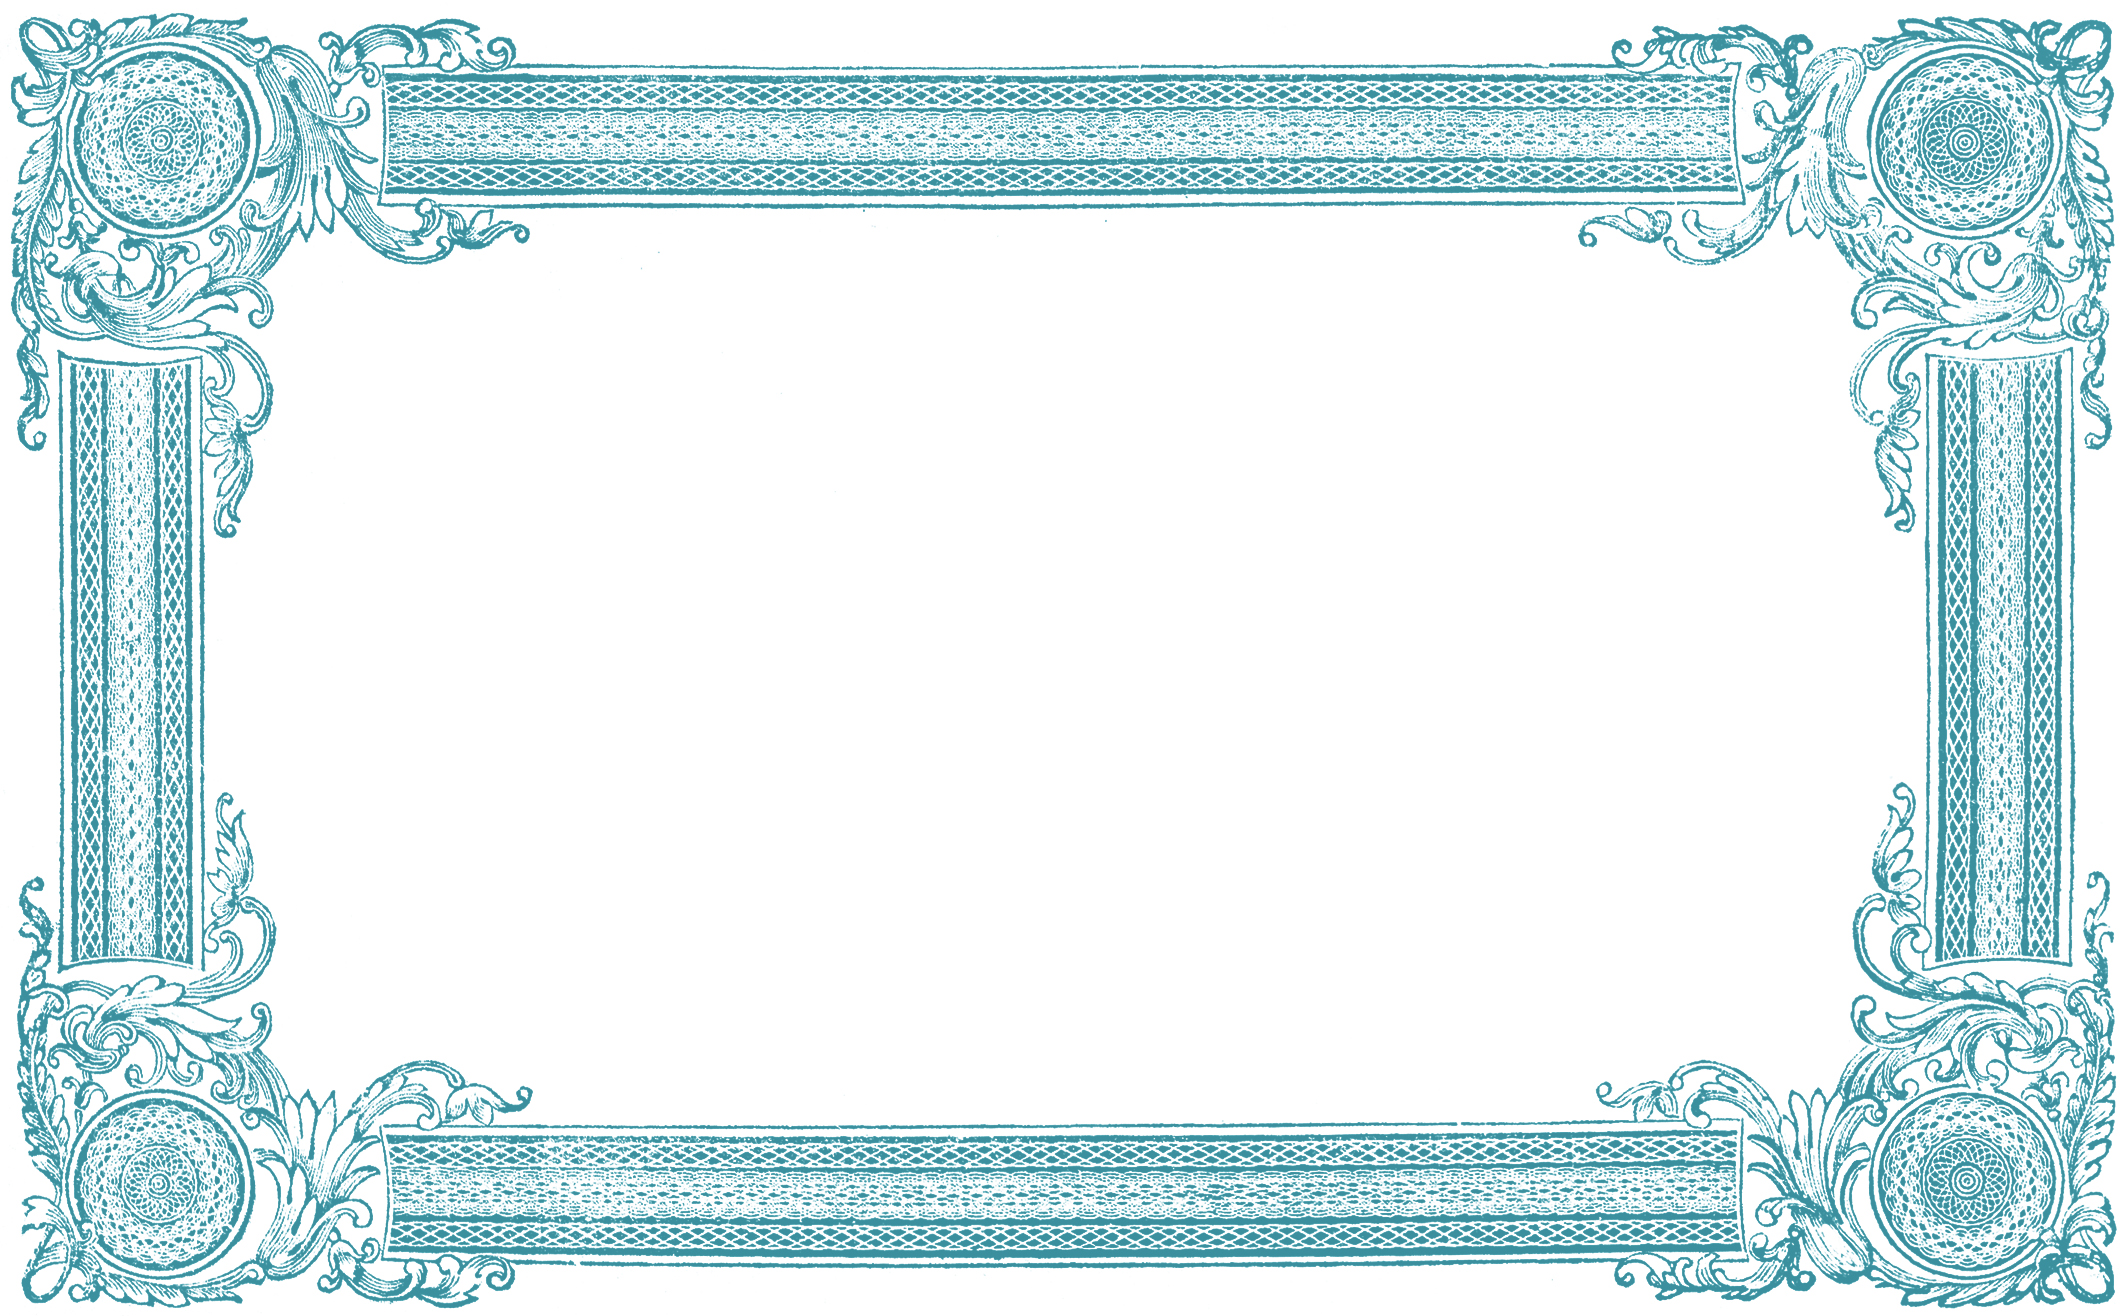 Free frame clip art images the graphics fairy 2